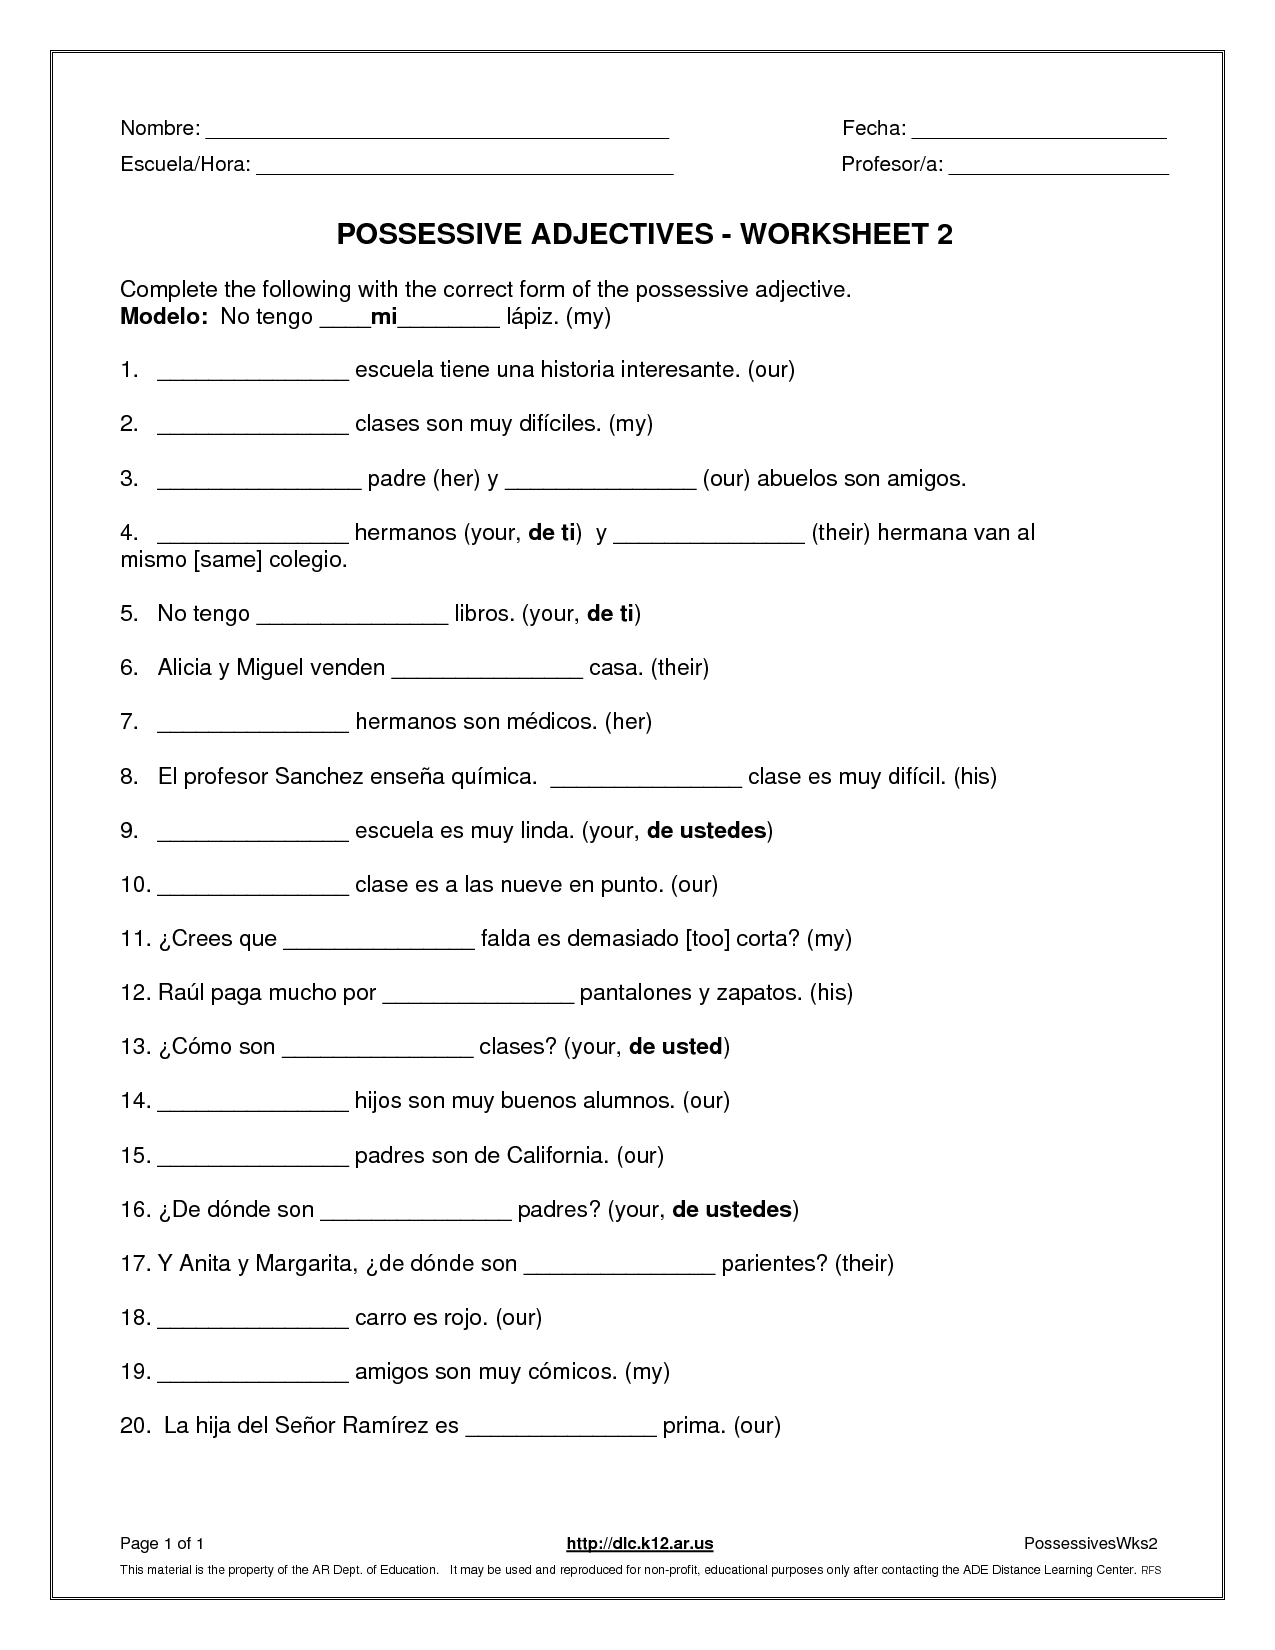 Worksheets On Possesive Adjectives In Spanish